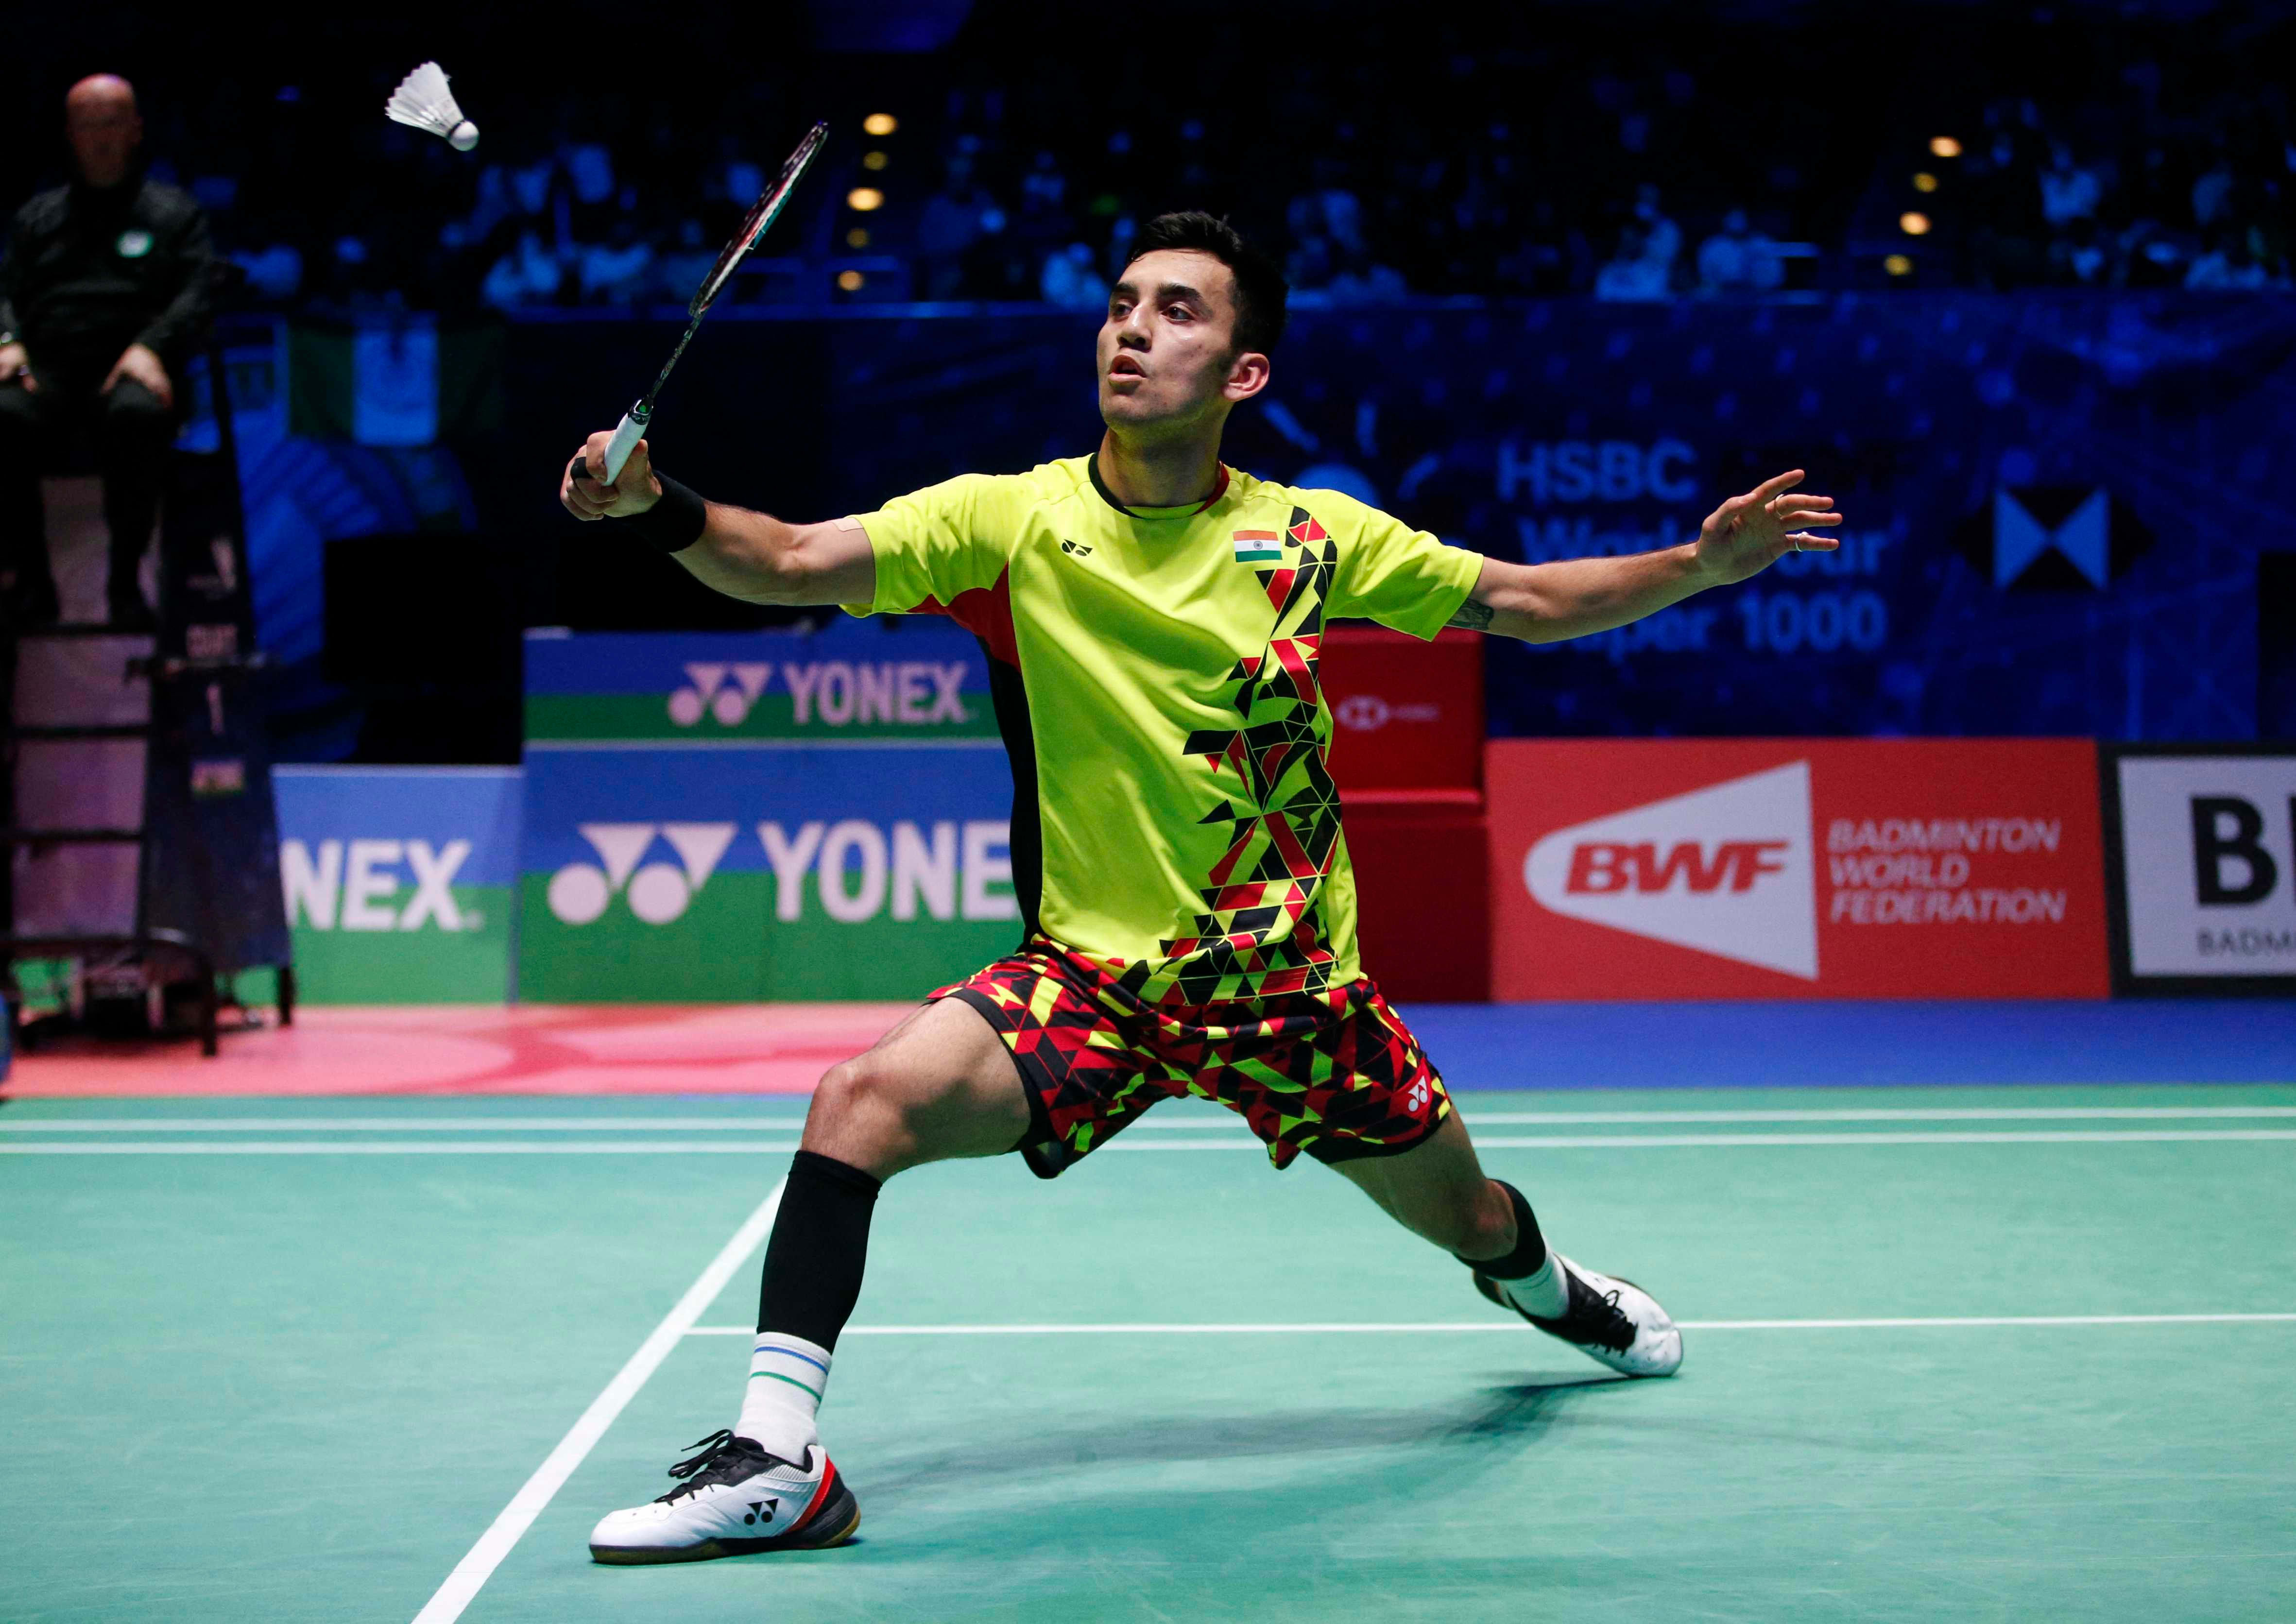 BWF World Championships 2022 Day 2 - Tuesday 23 August